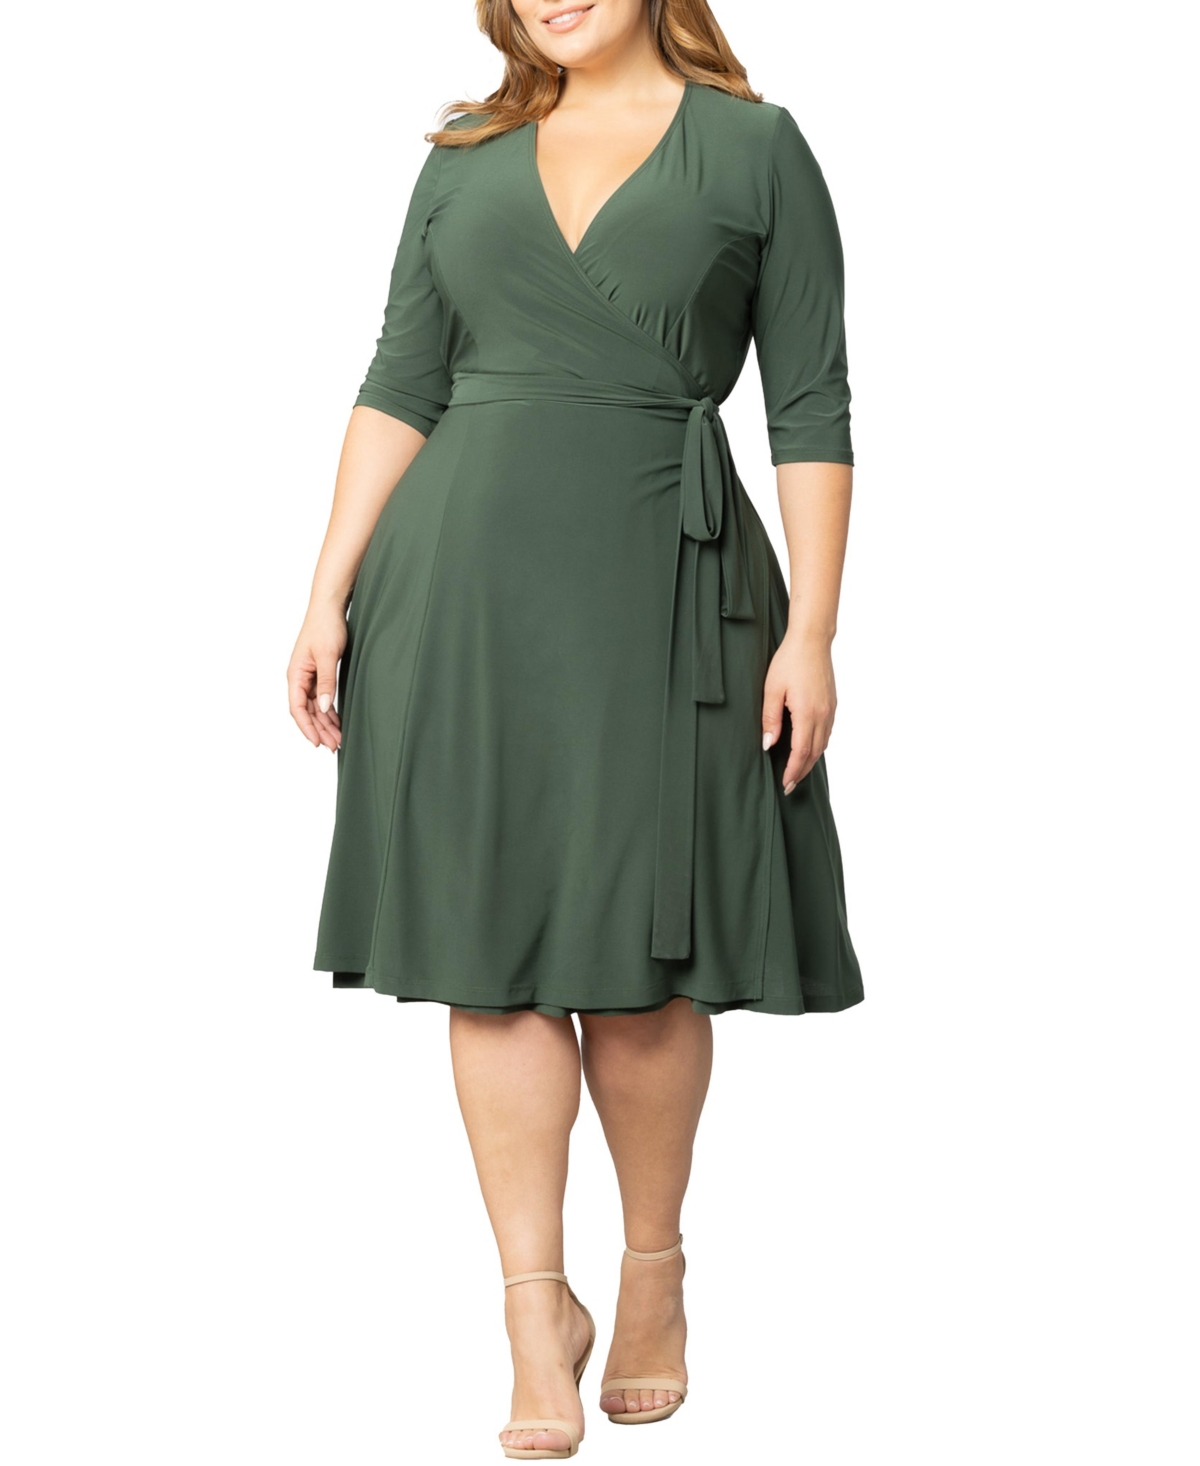 Plus Size Essential Wrap Dress with 3/4 Sleeves - Olive green